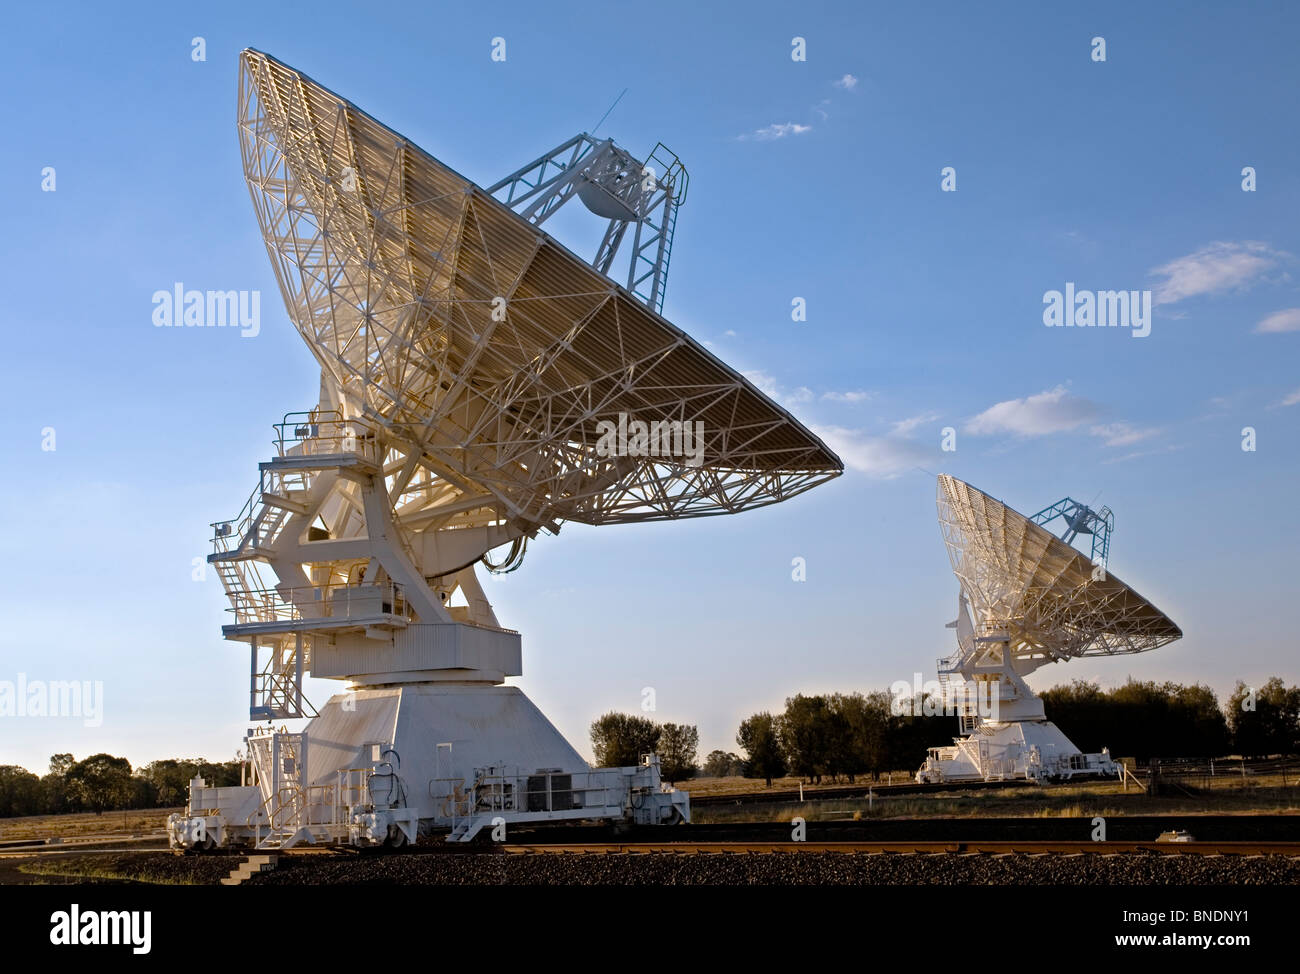 two compact array radio telescopes, photographed in the late afternoon, Narrabri, NSW, Australia Stock Photo